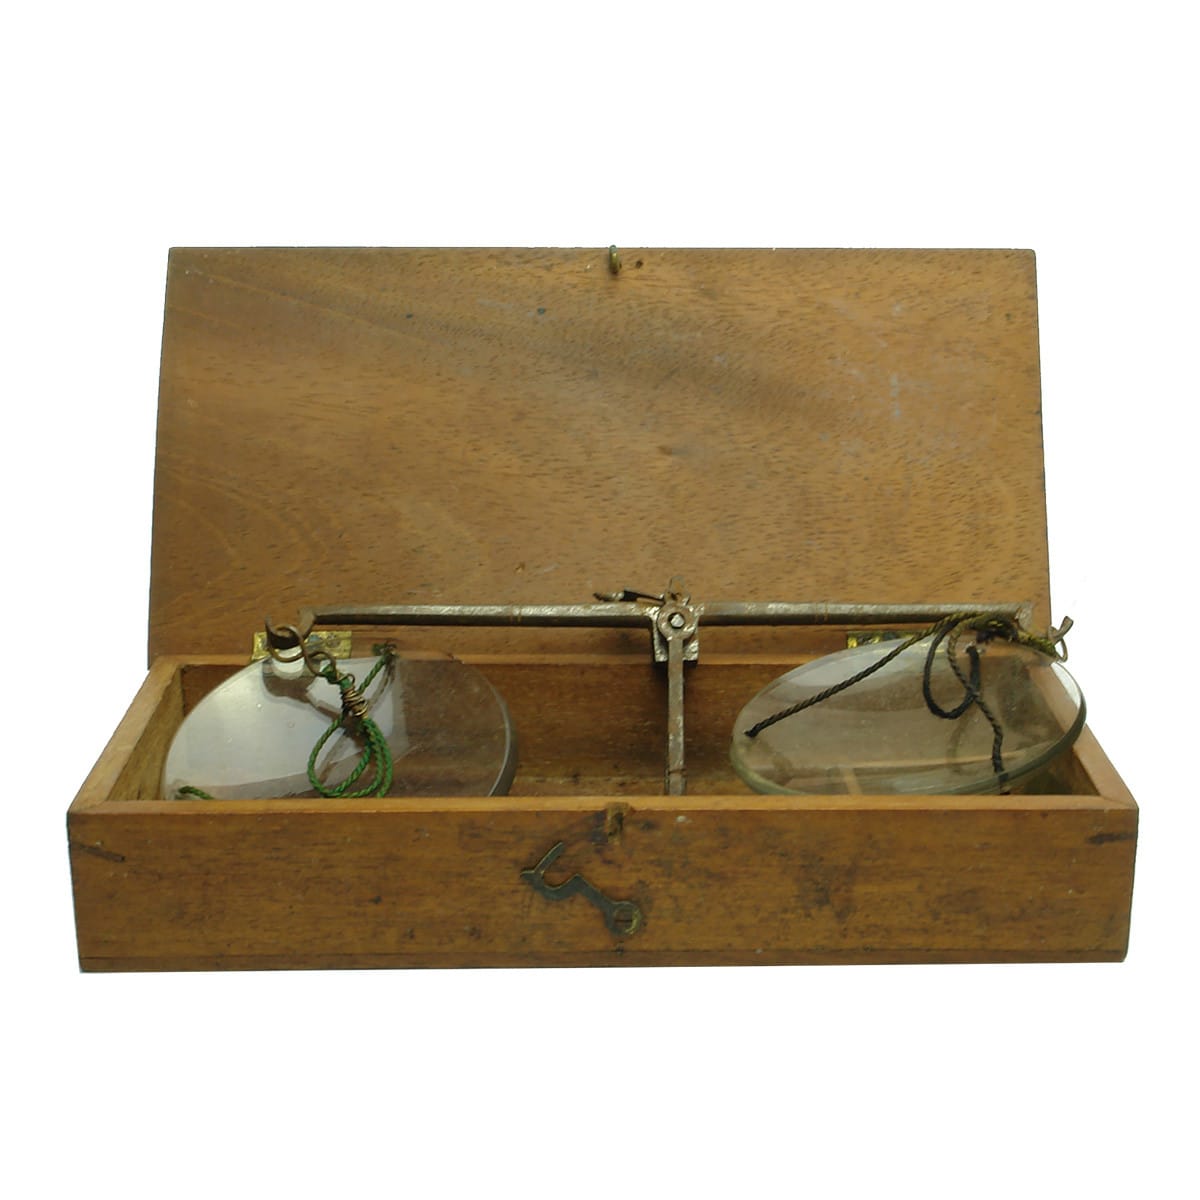 Wooden boxed hand scales set. Brass metal work and glass scale pans. Some brass and lead weights.